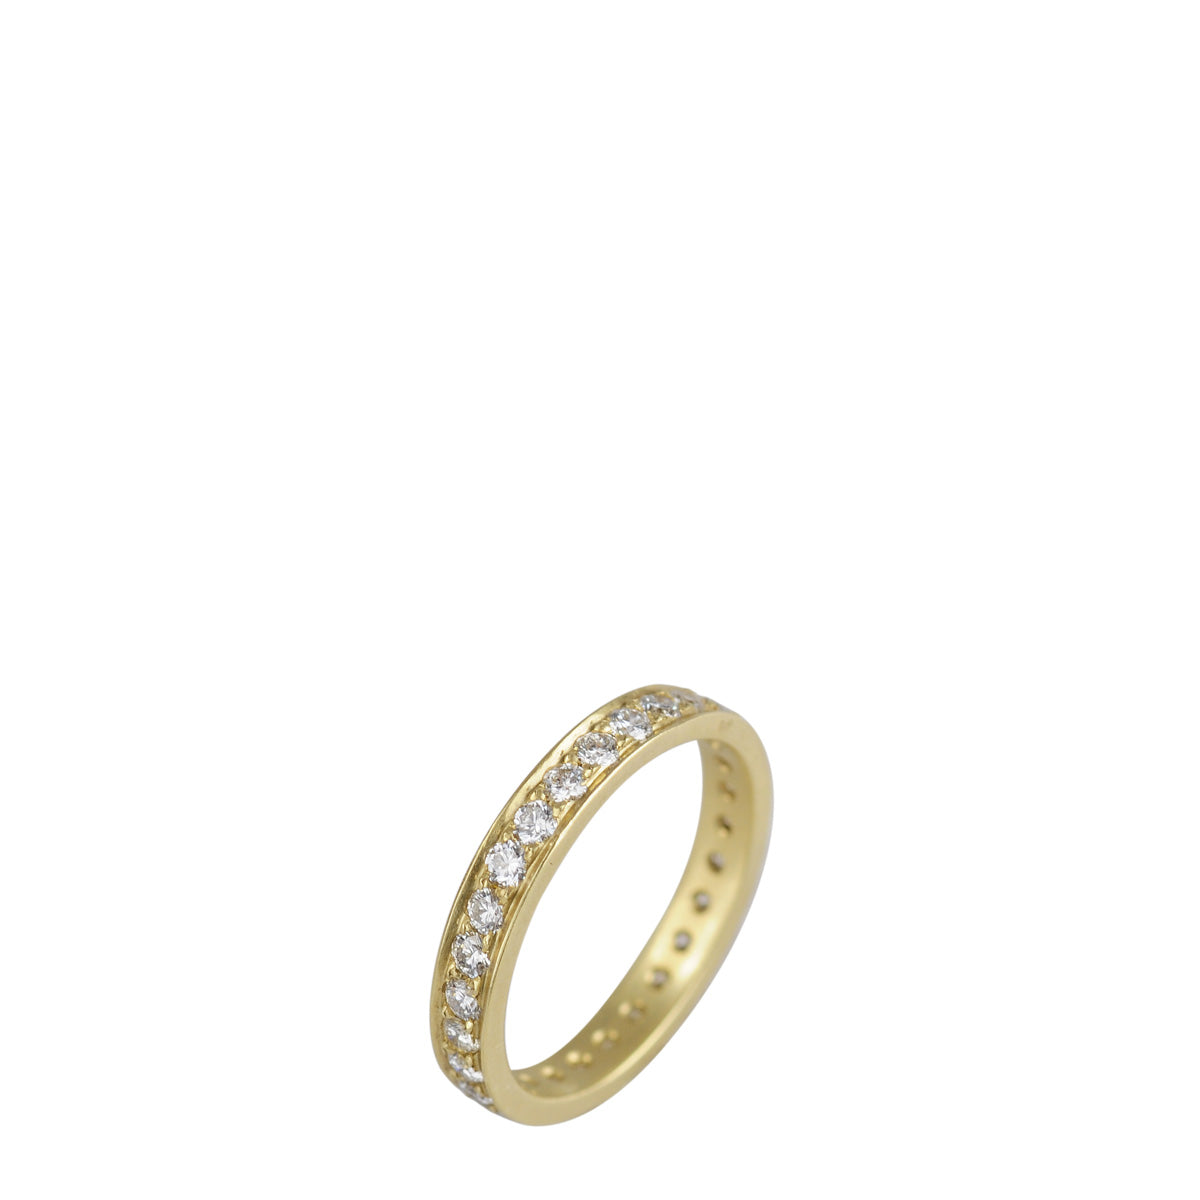 18K Gold 3mm Band with 2mm Brilliant Cut Diamonds